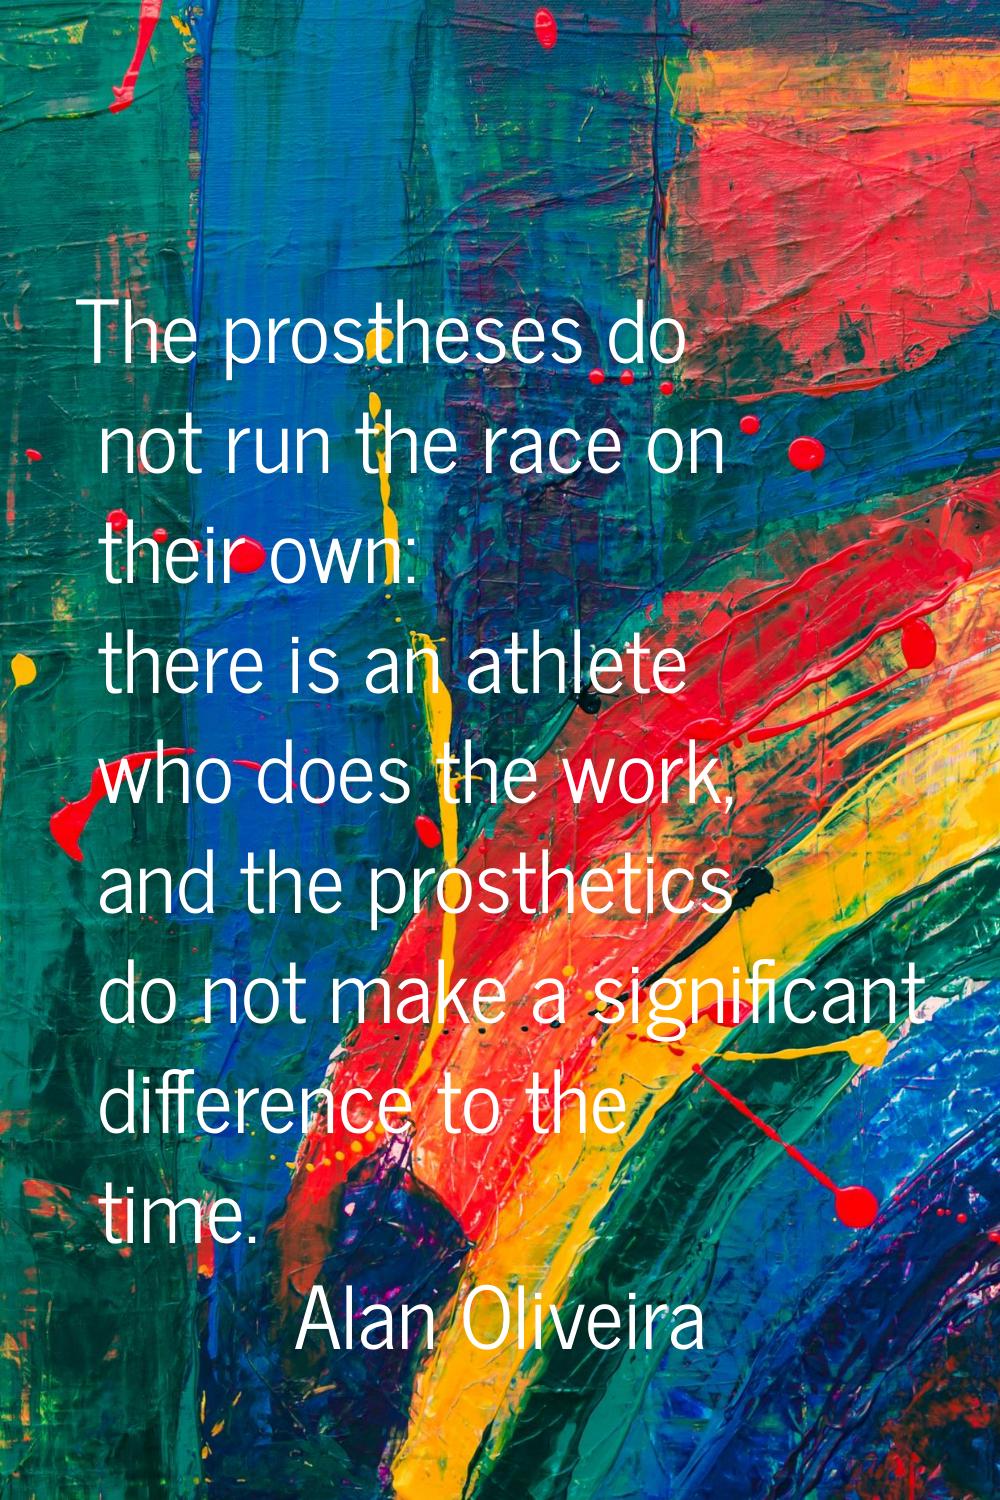 The prostheses do not run the race on their own: there is an athlete who does the work, and the pro